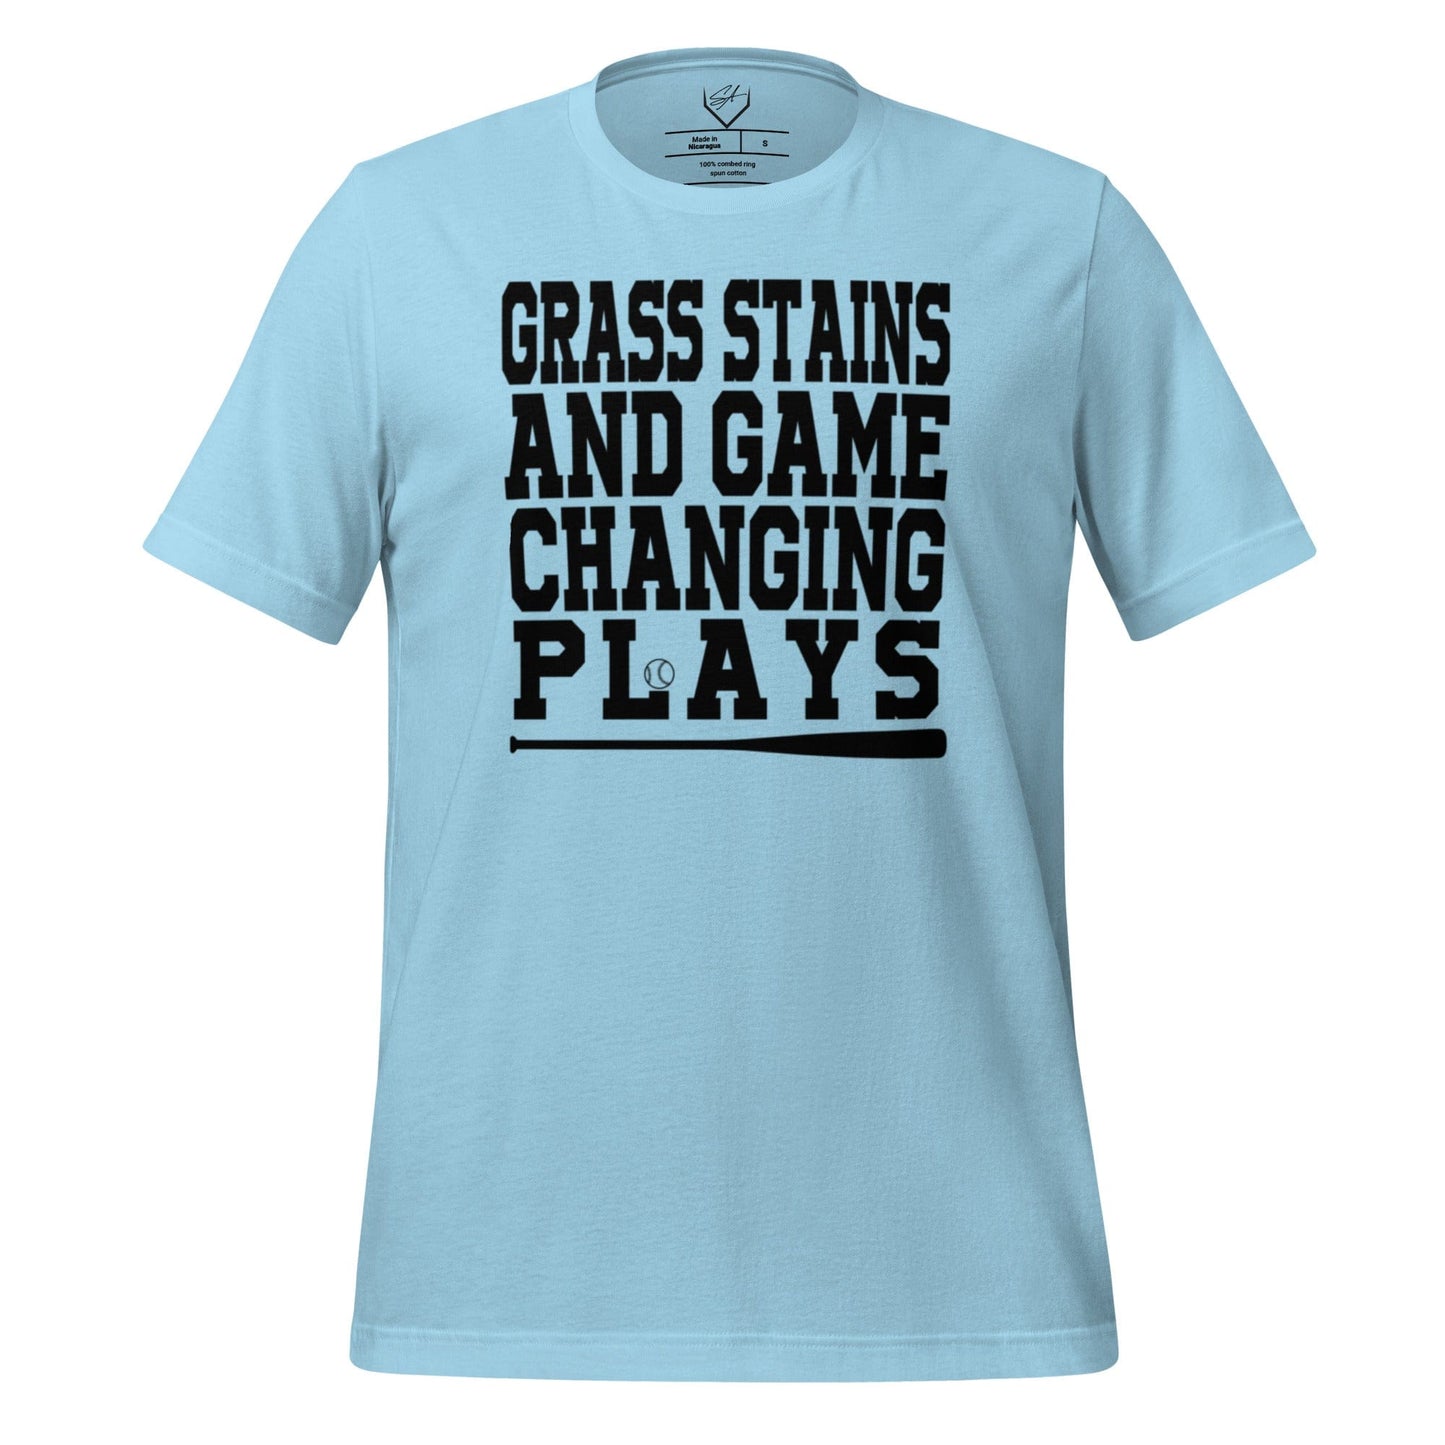 Grass Stains And Game Changing Plays - Adult Tee